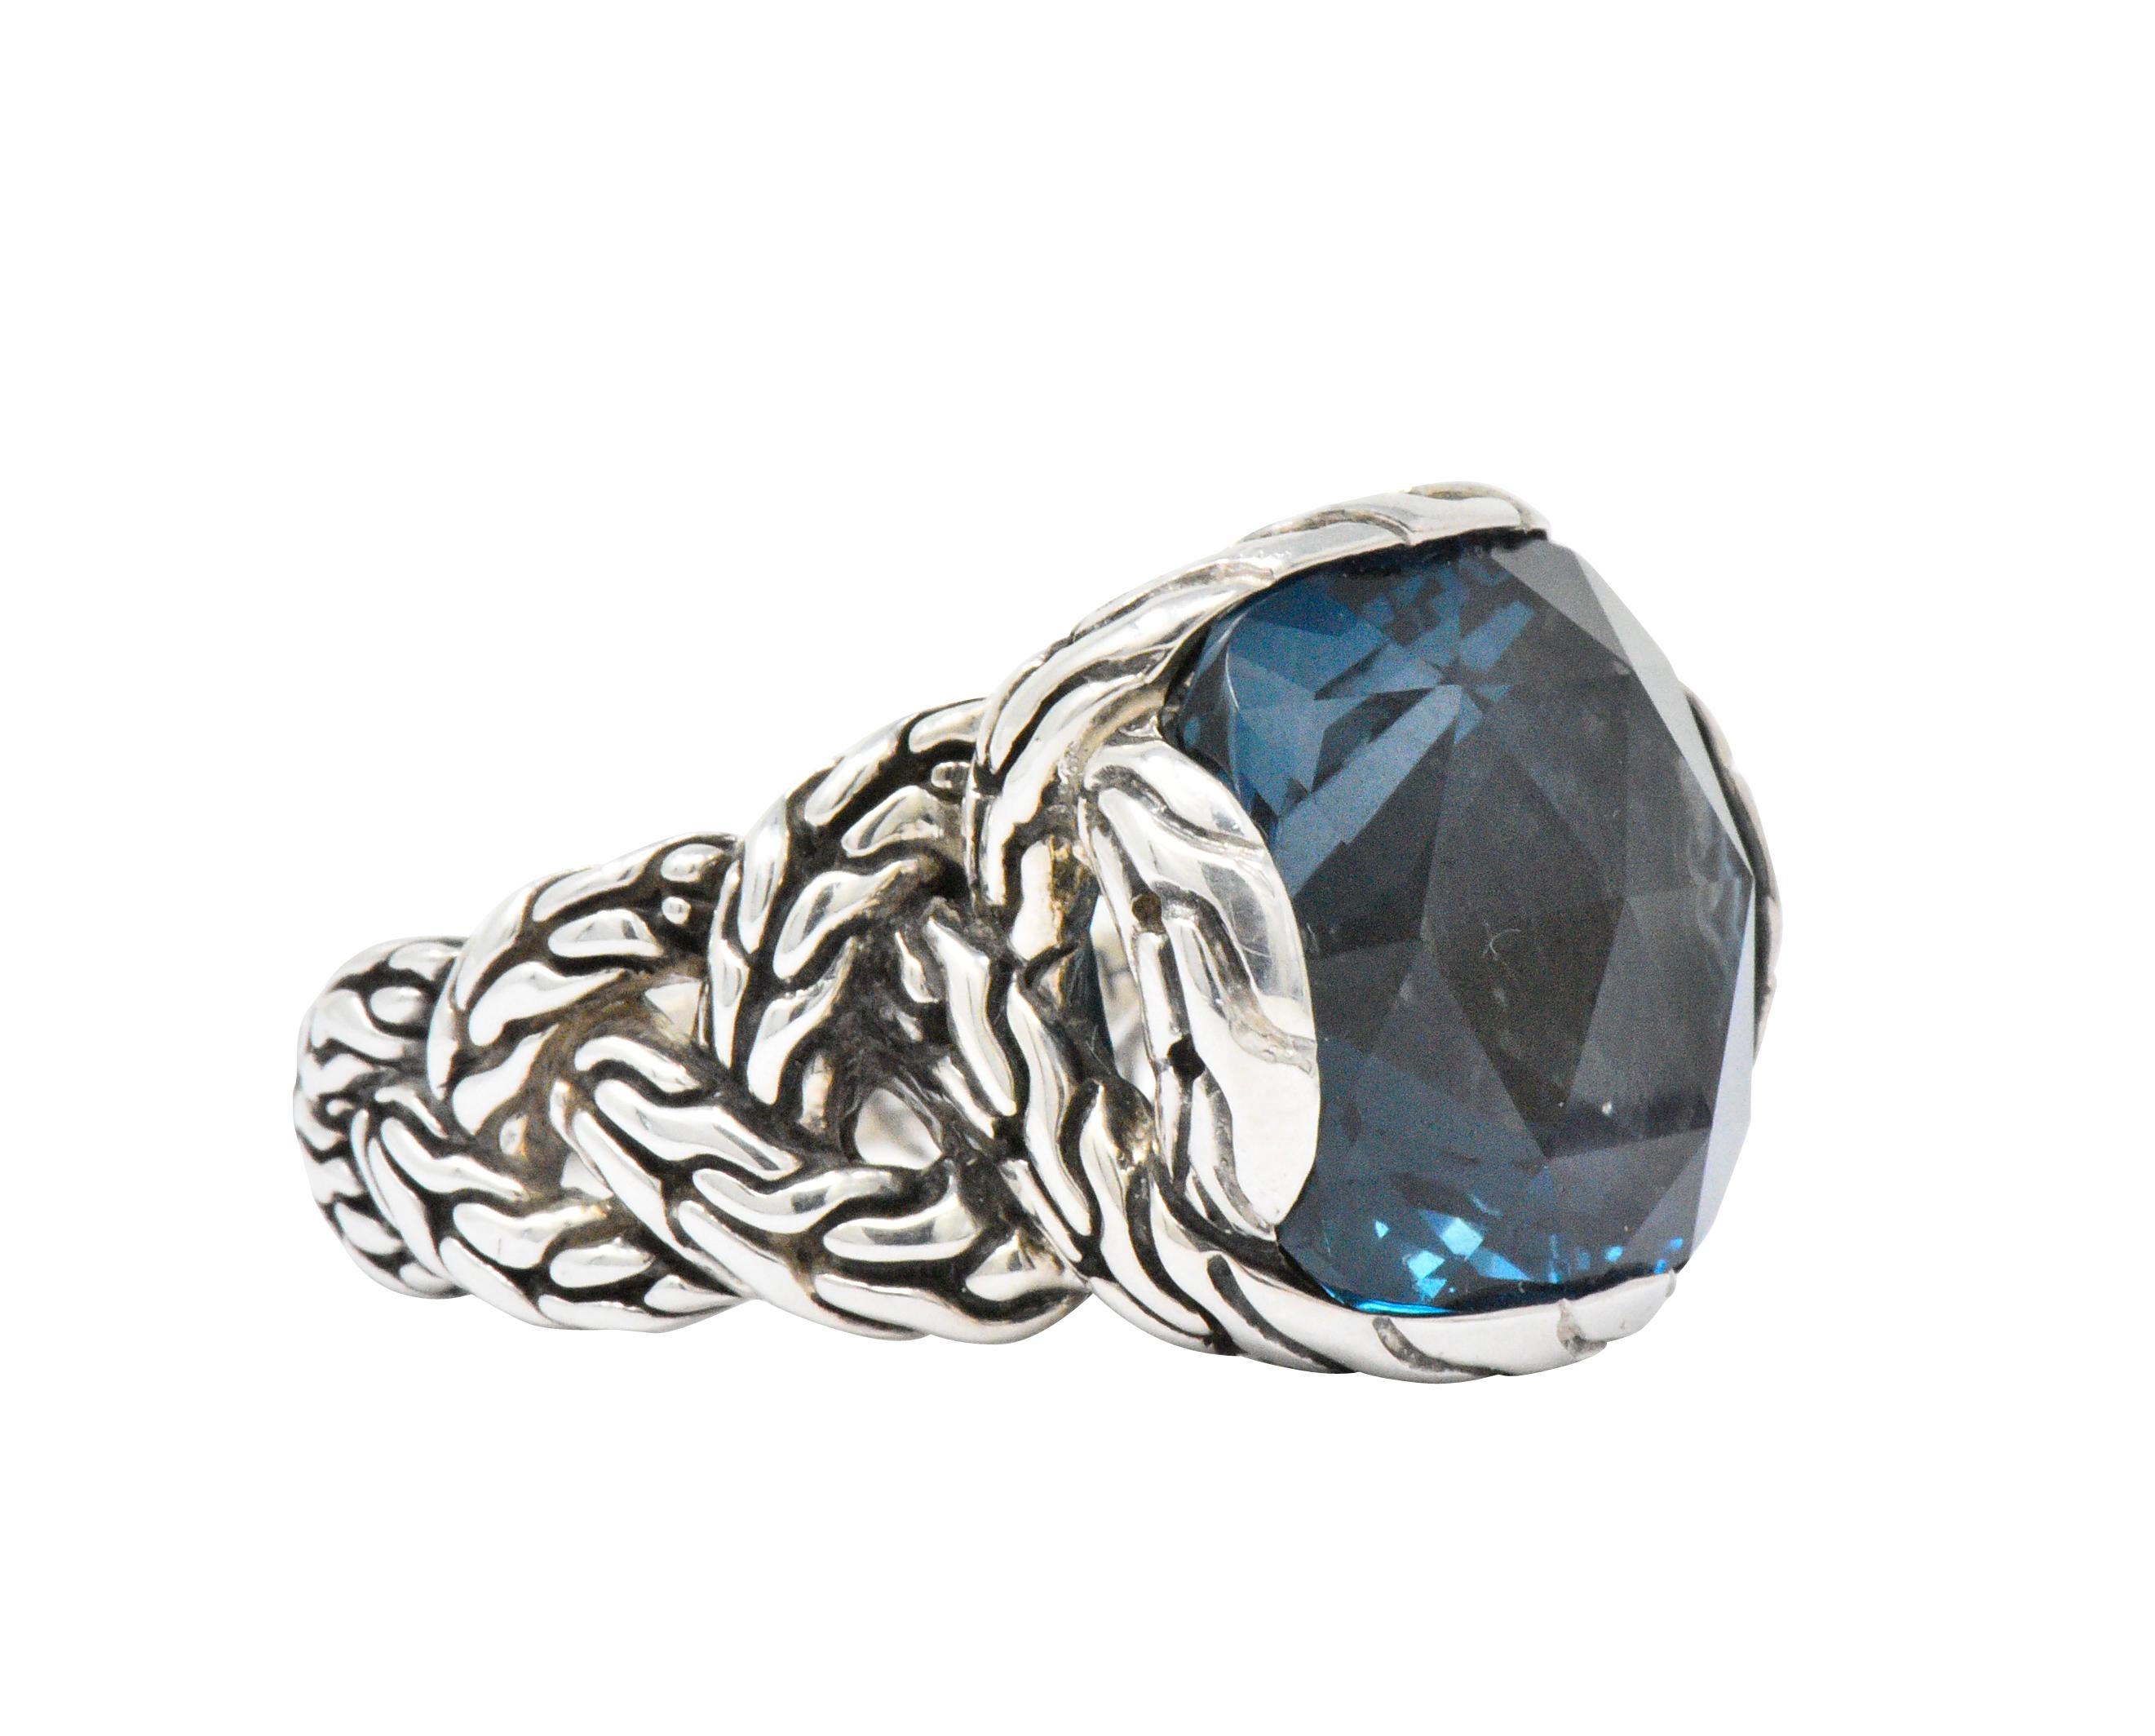 Centering a cushion cut and bezel set London blue topaz, deep vivid blue 

Securely bezel set in classic John Hardy chain style mount

Chain motif continuing along sides of shank

Signed Hardy 925 with makers mark

New with original tags

Top